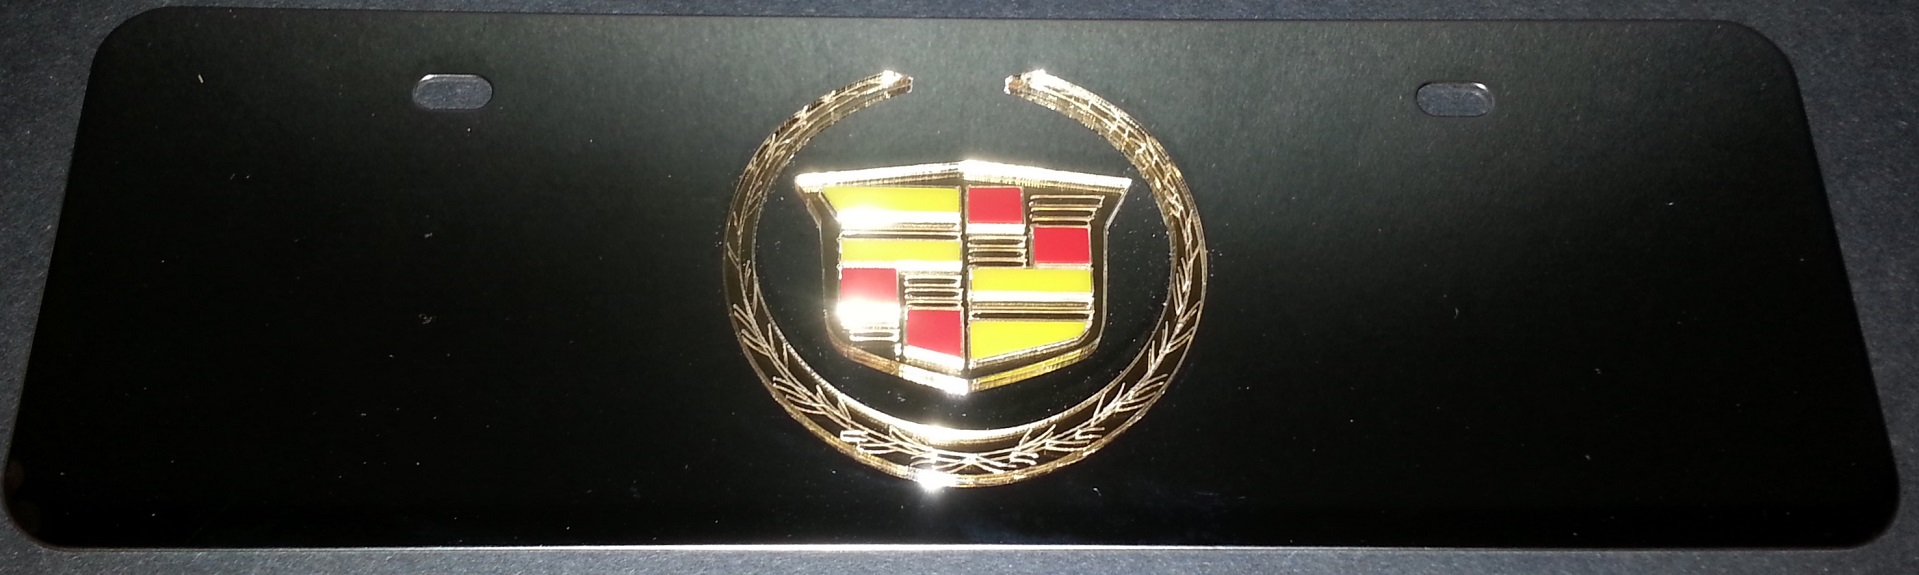 Cadillac Mini Chrome PLATEd Stainless Steel PLATE